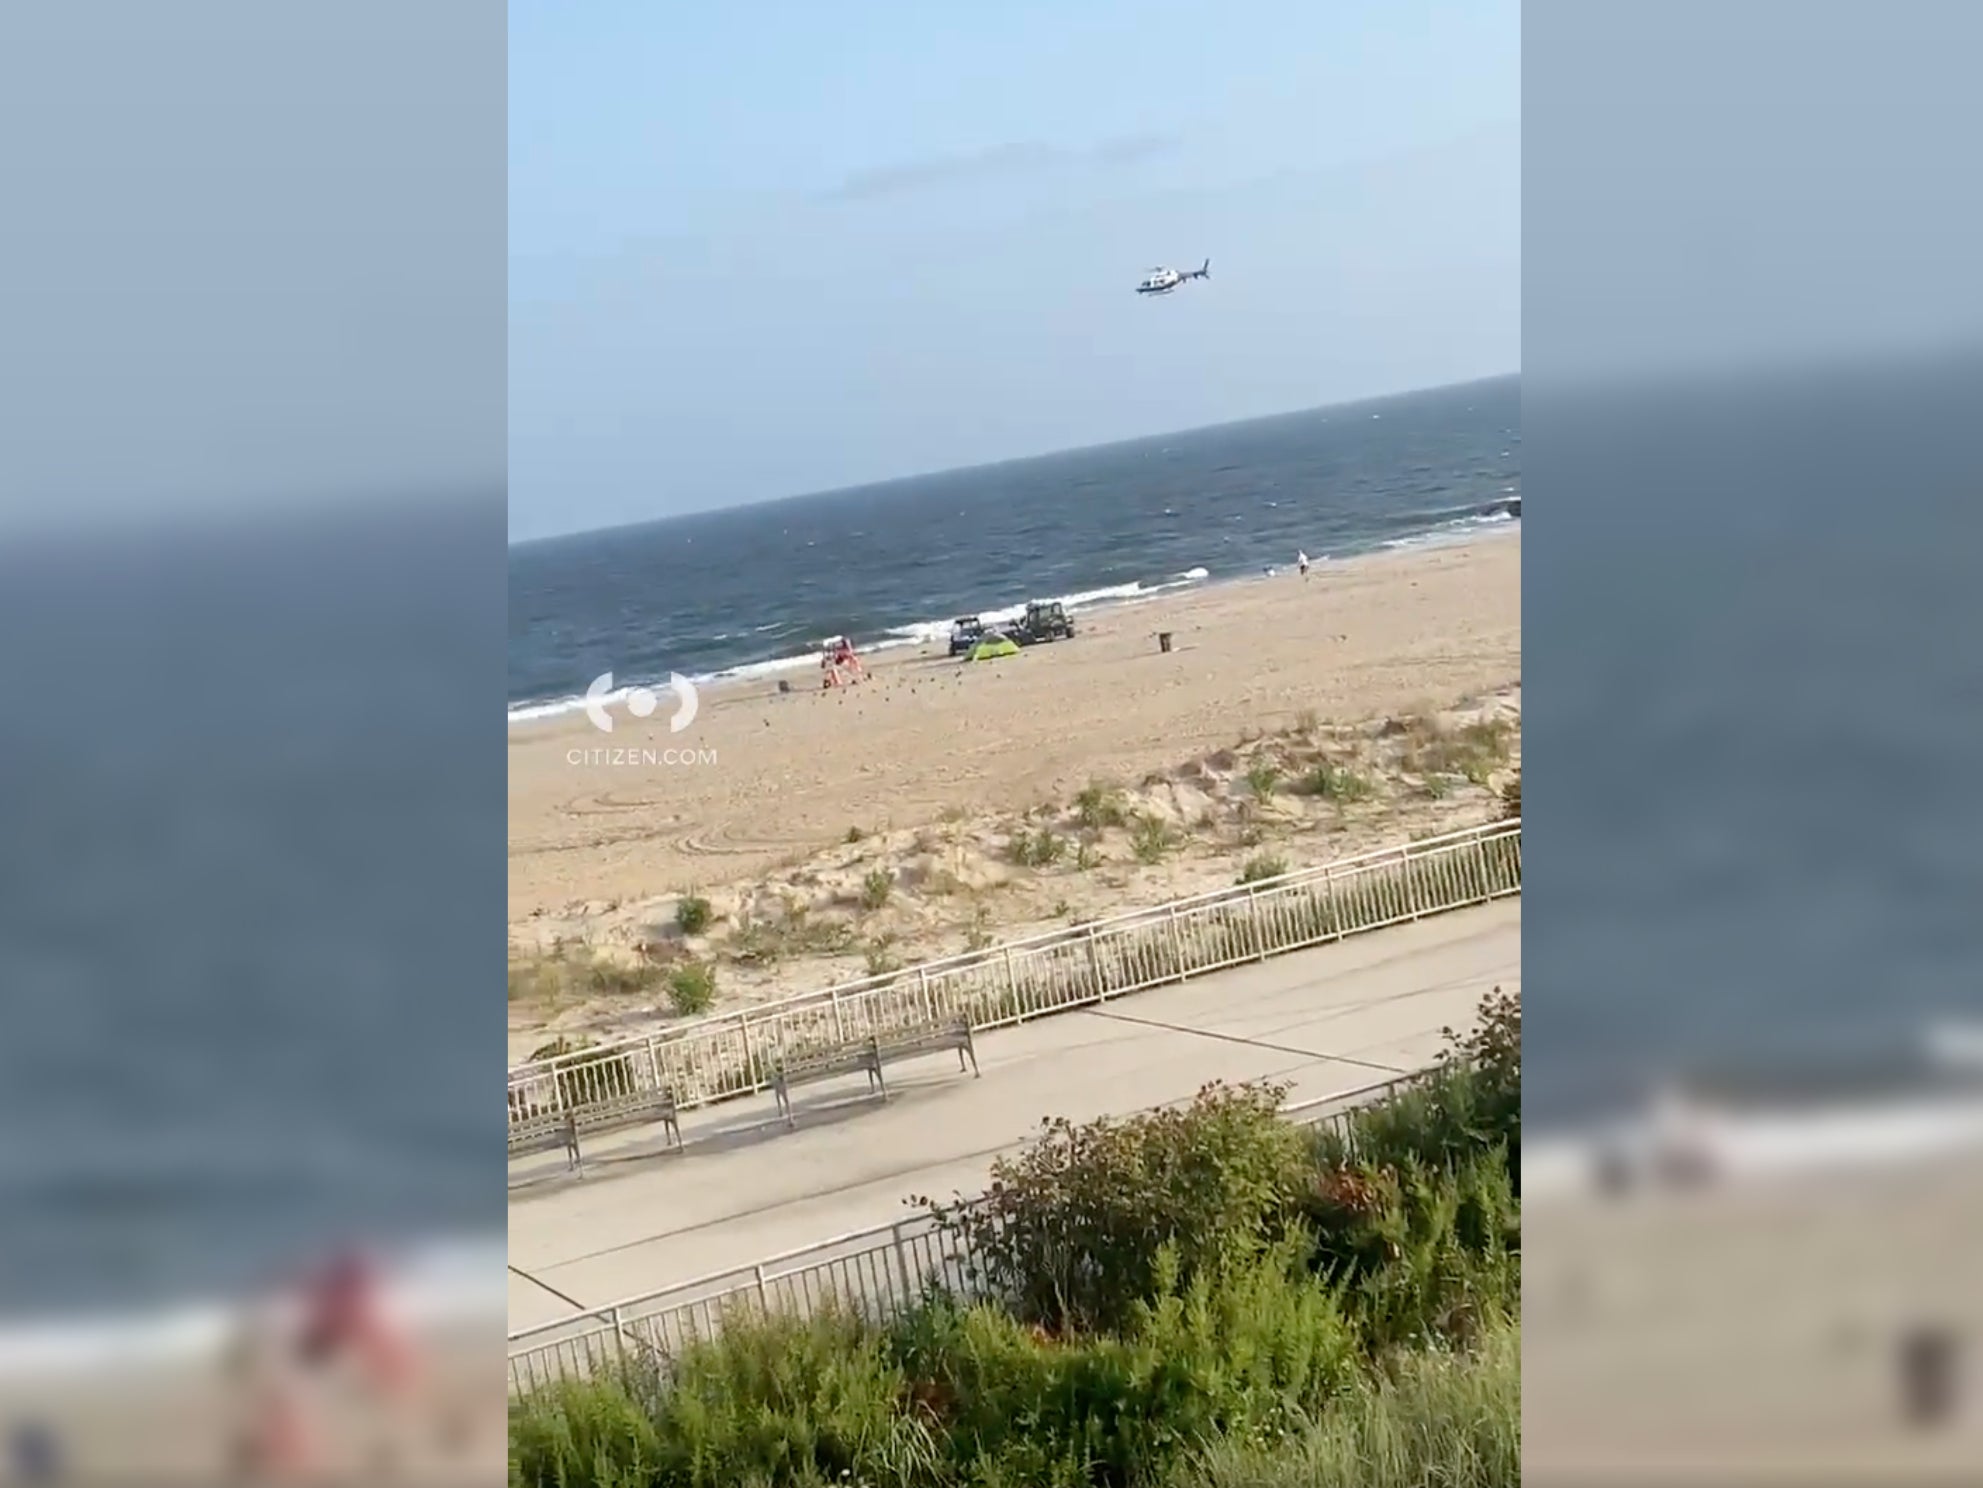 A woman was in critical condition after a shark attack on Monday off Rockaway Beach in Queens